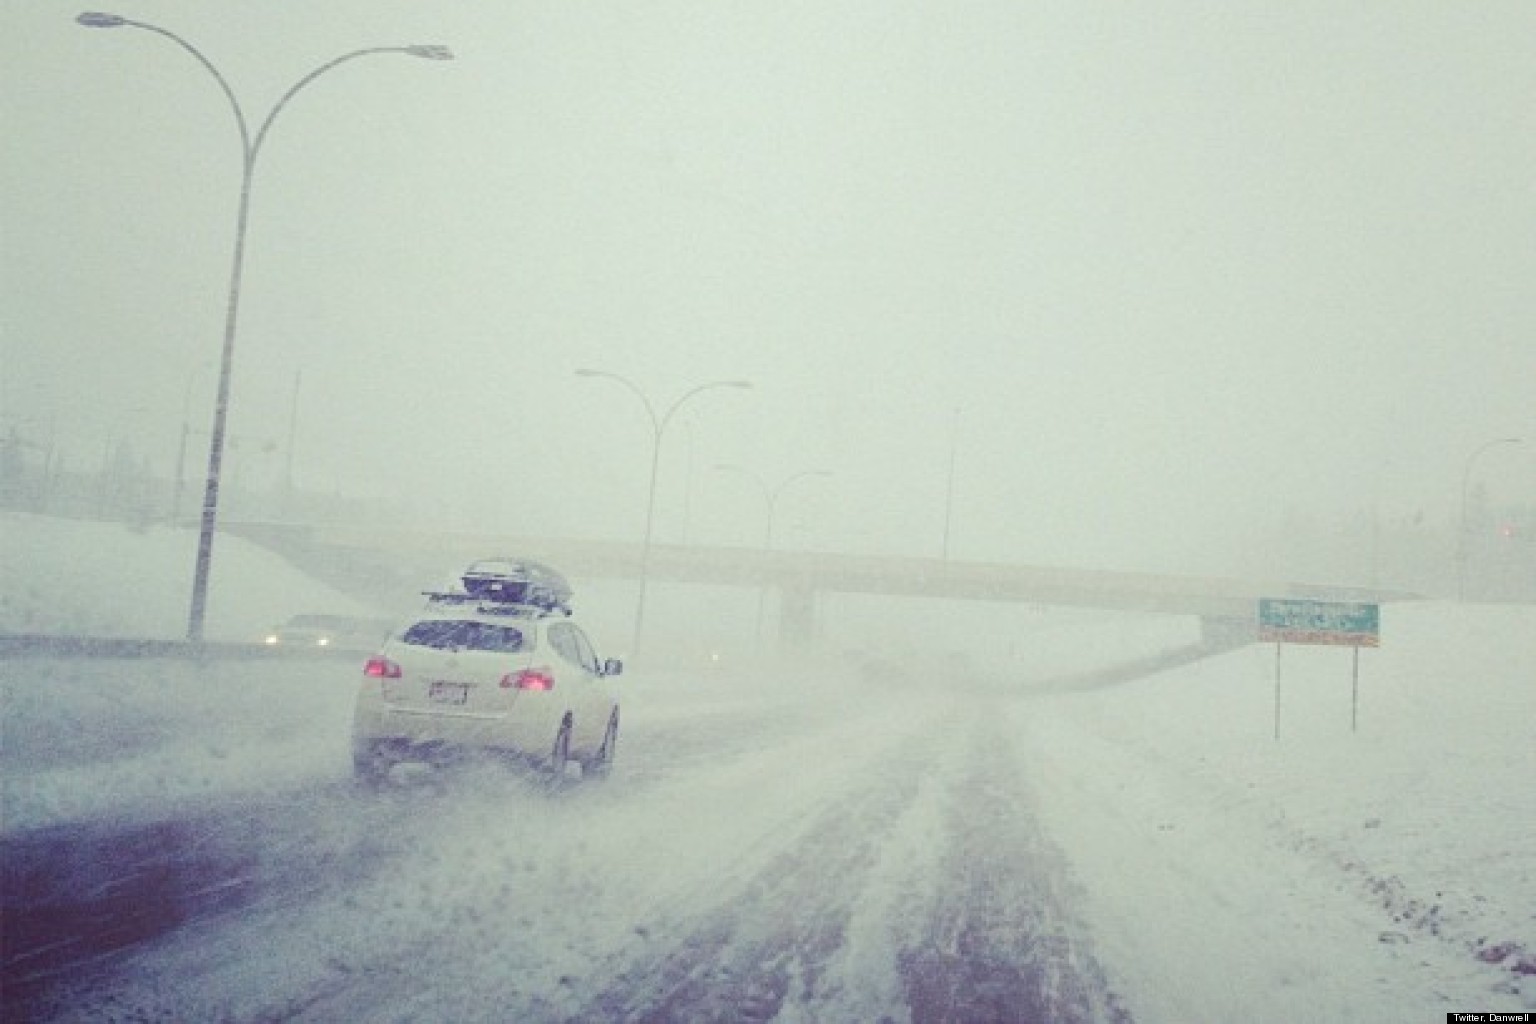 Edmonton And Area Snowstorm Warning: 10 To 15 Centimeters Of Snowfall ...